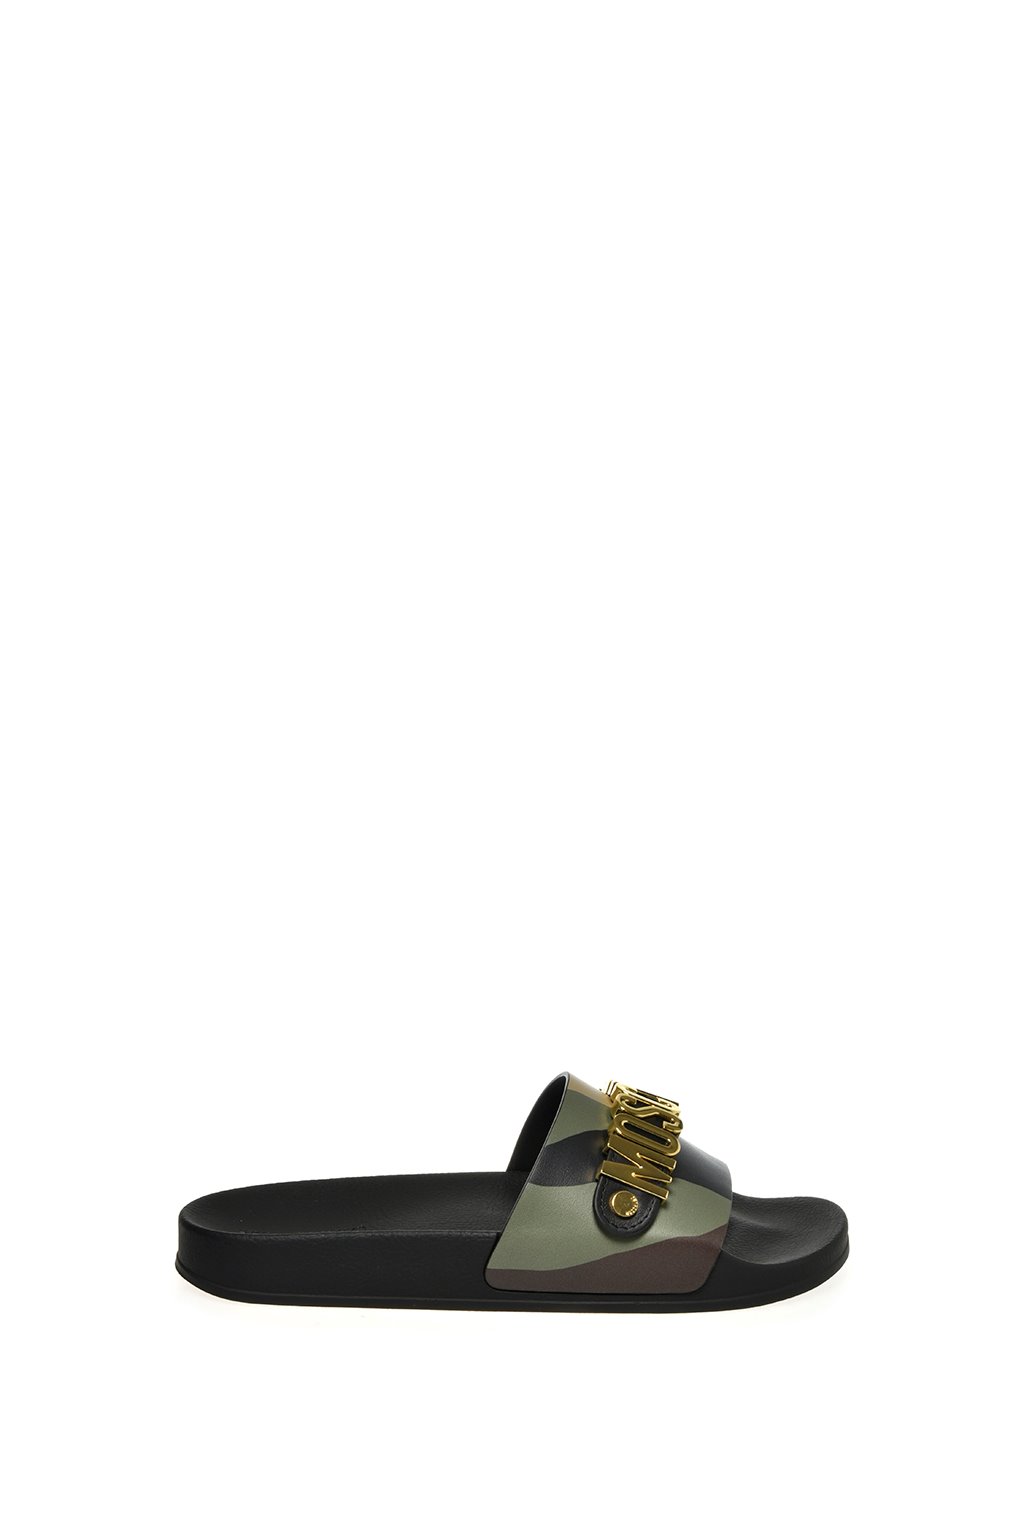 Drakesboutique - MOSCHINO Slippers Camouflage Gold Buckle